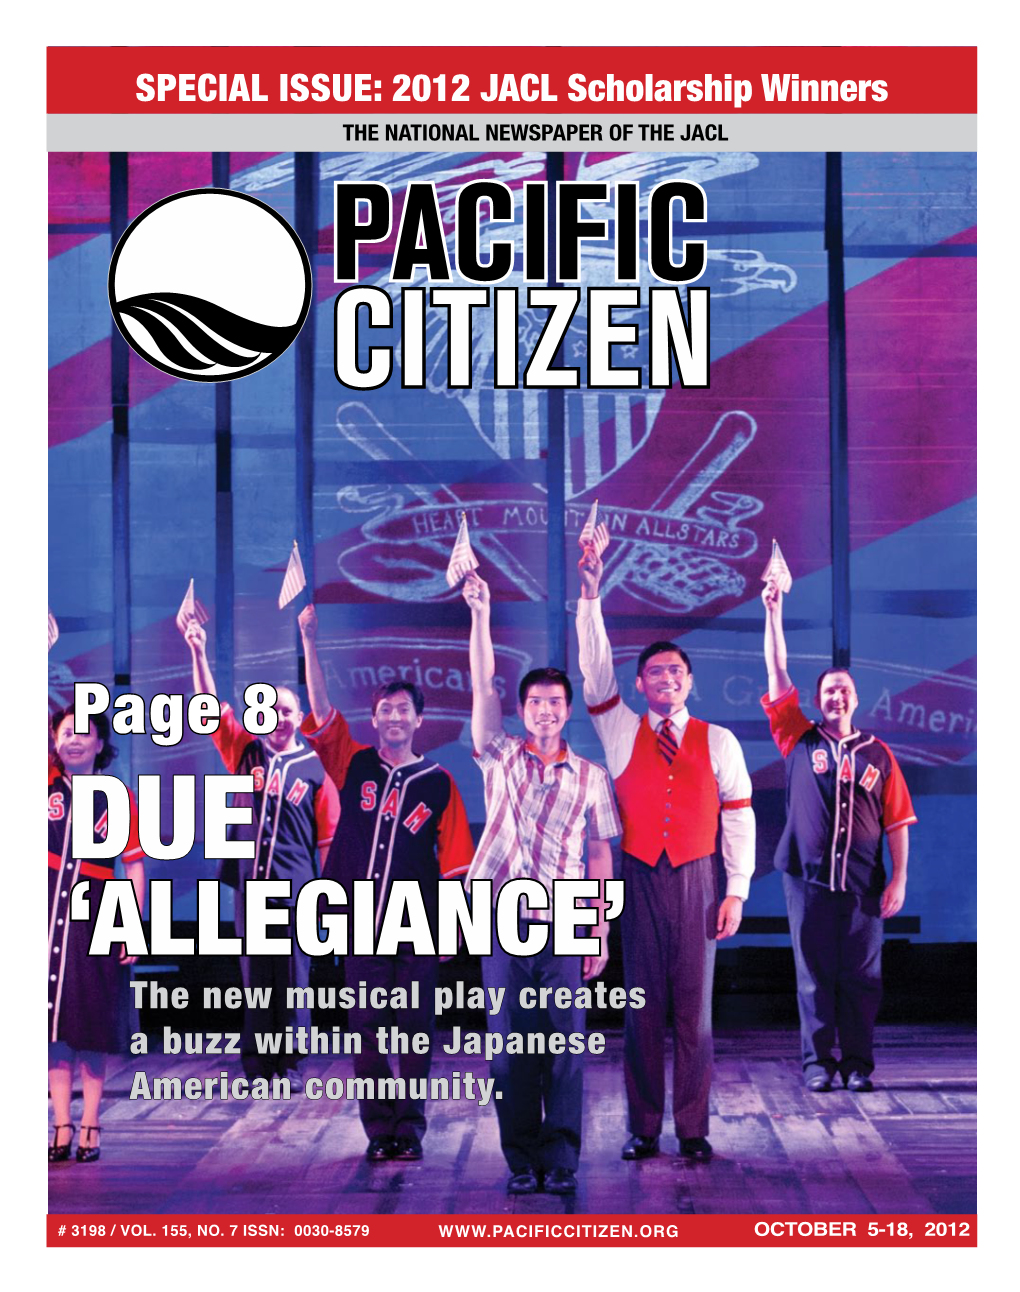 Page 8 DUE ‘ALLEGIANCE’ the New Musical Play Creates a Buzz Within the Japanese American Community